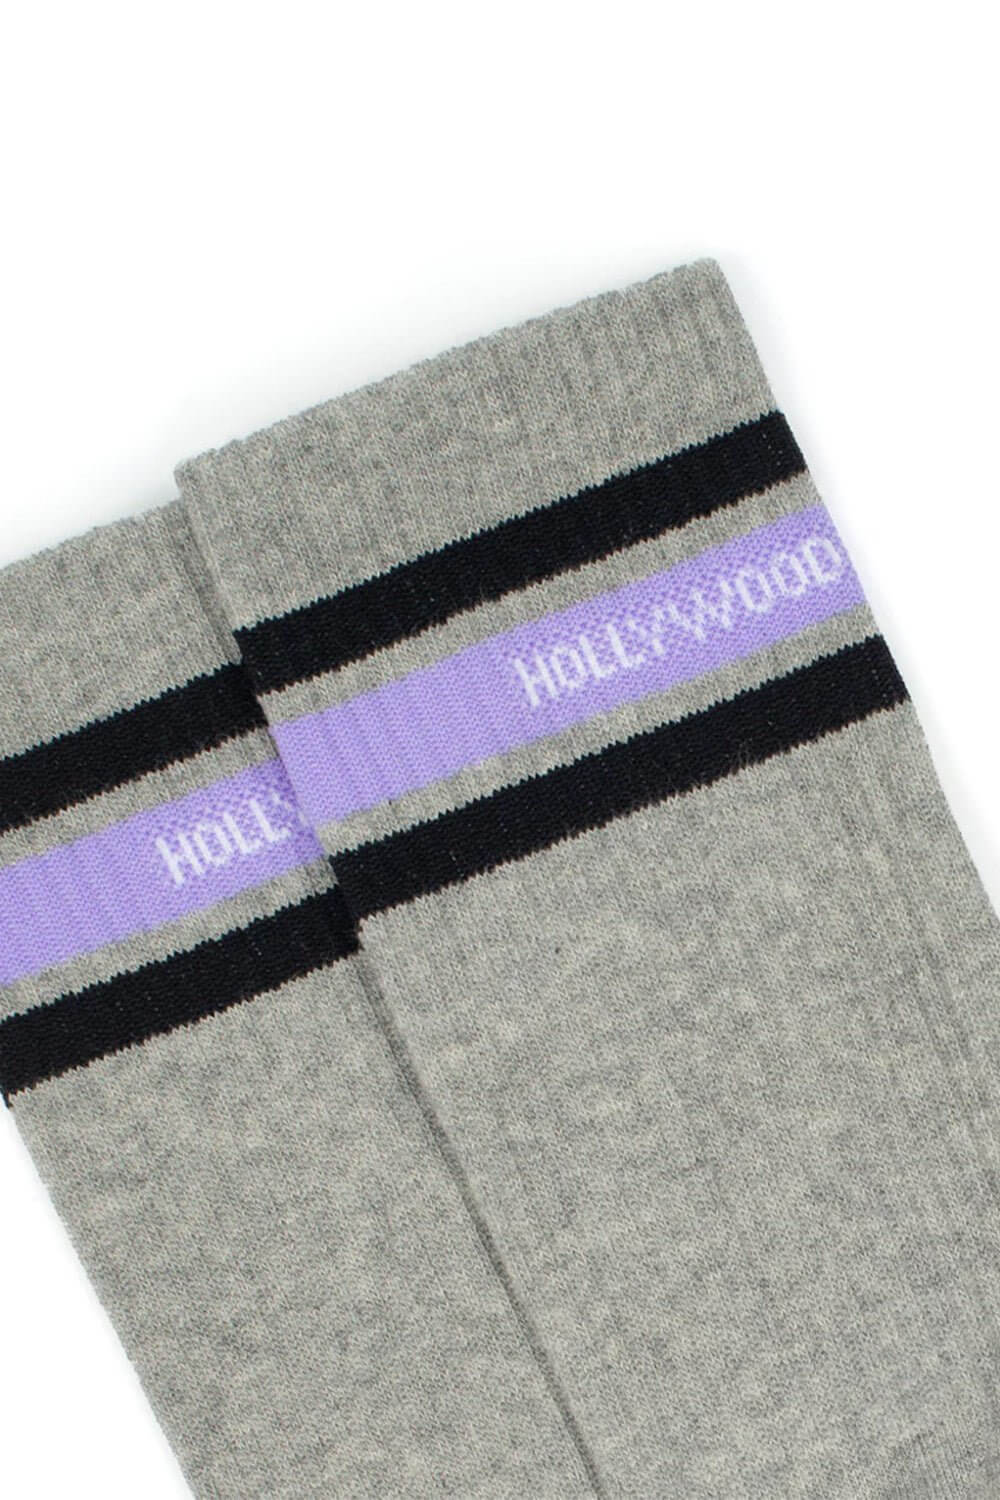 HTC BASIC WOMAN SOCKS Signature woman socks with Hollywood Trading Co script logo. 85% Cotton 10% Polyamide 5% Elastane. Made in Italy HTC LOS ANGELES